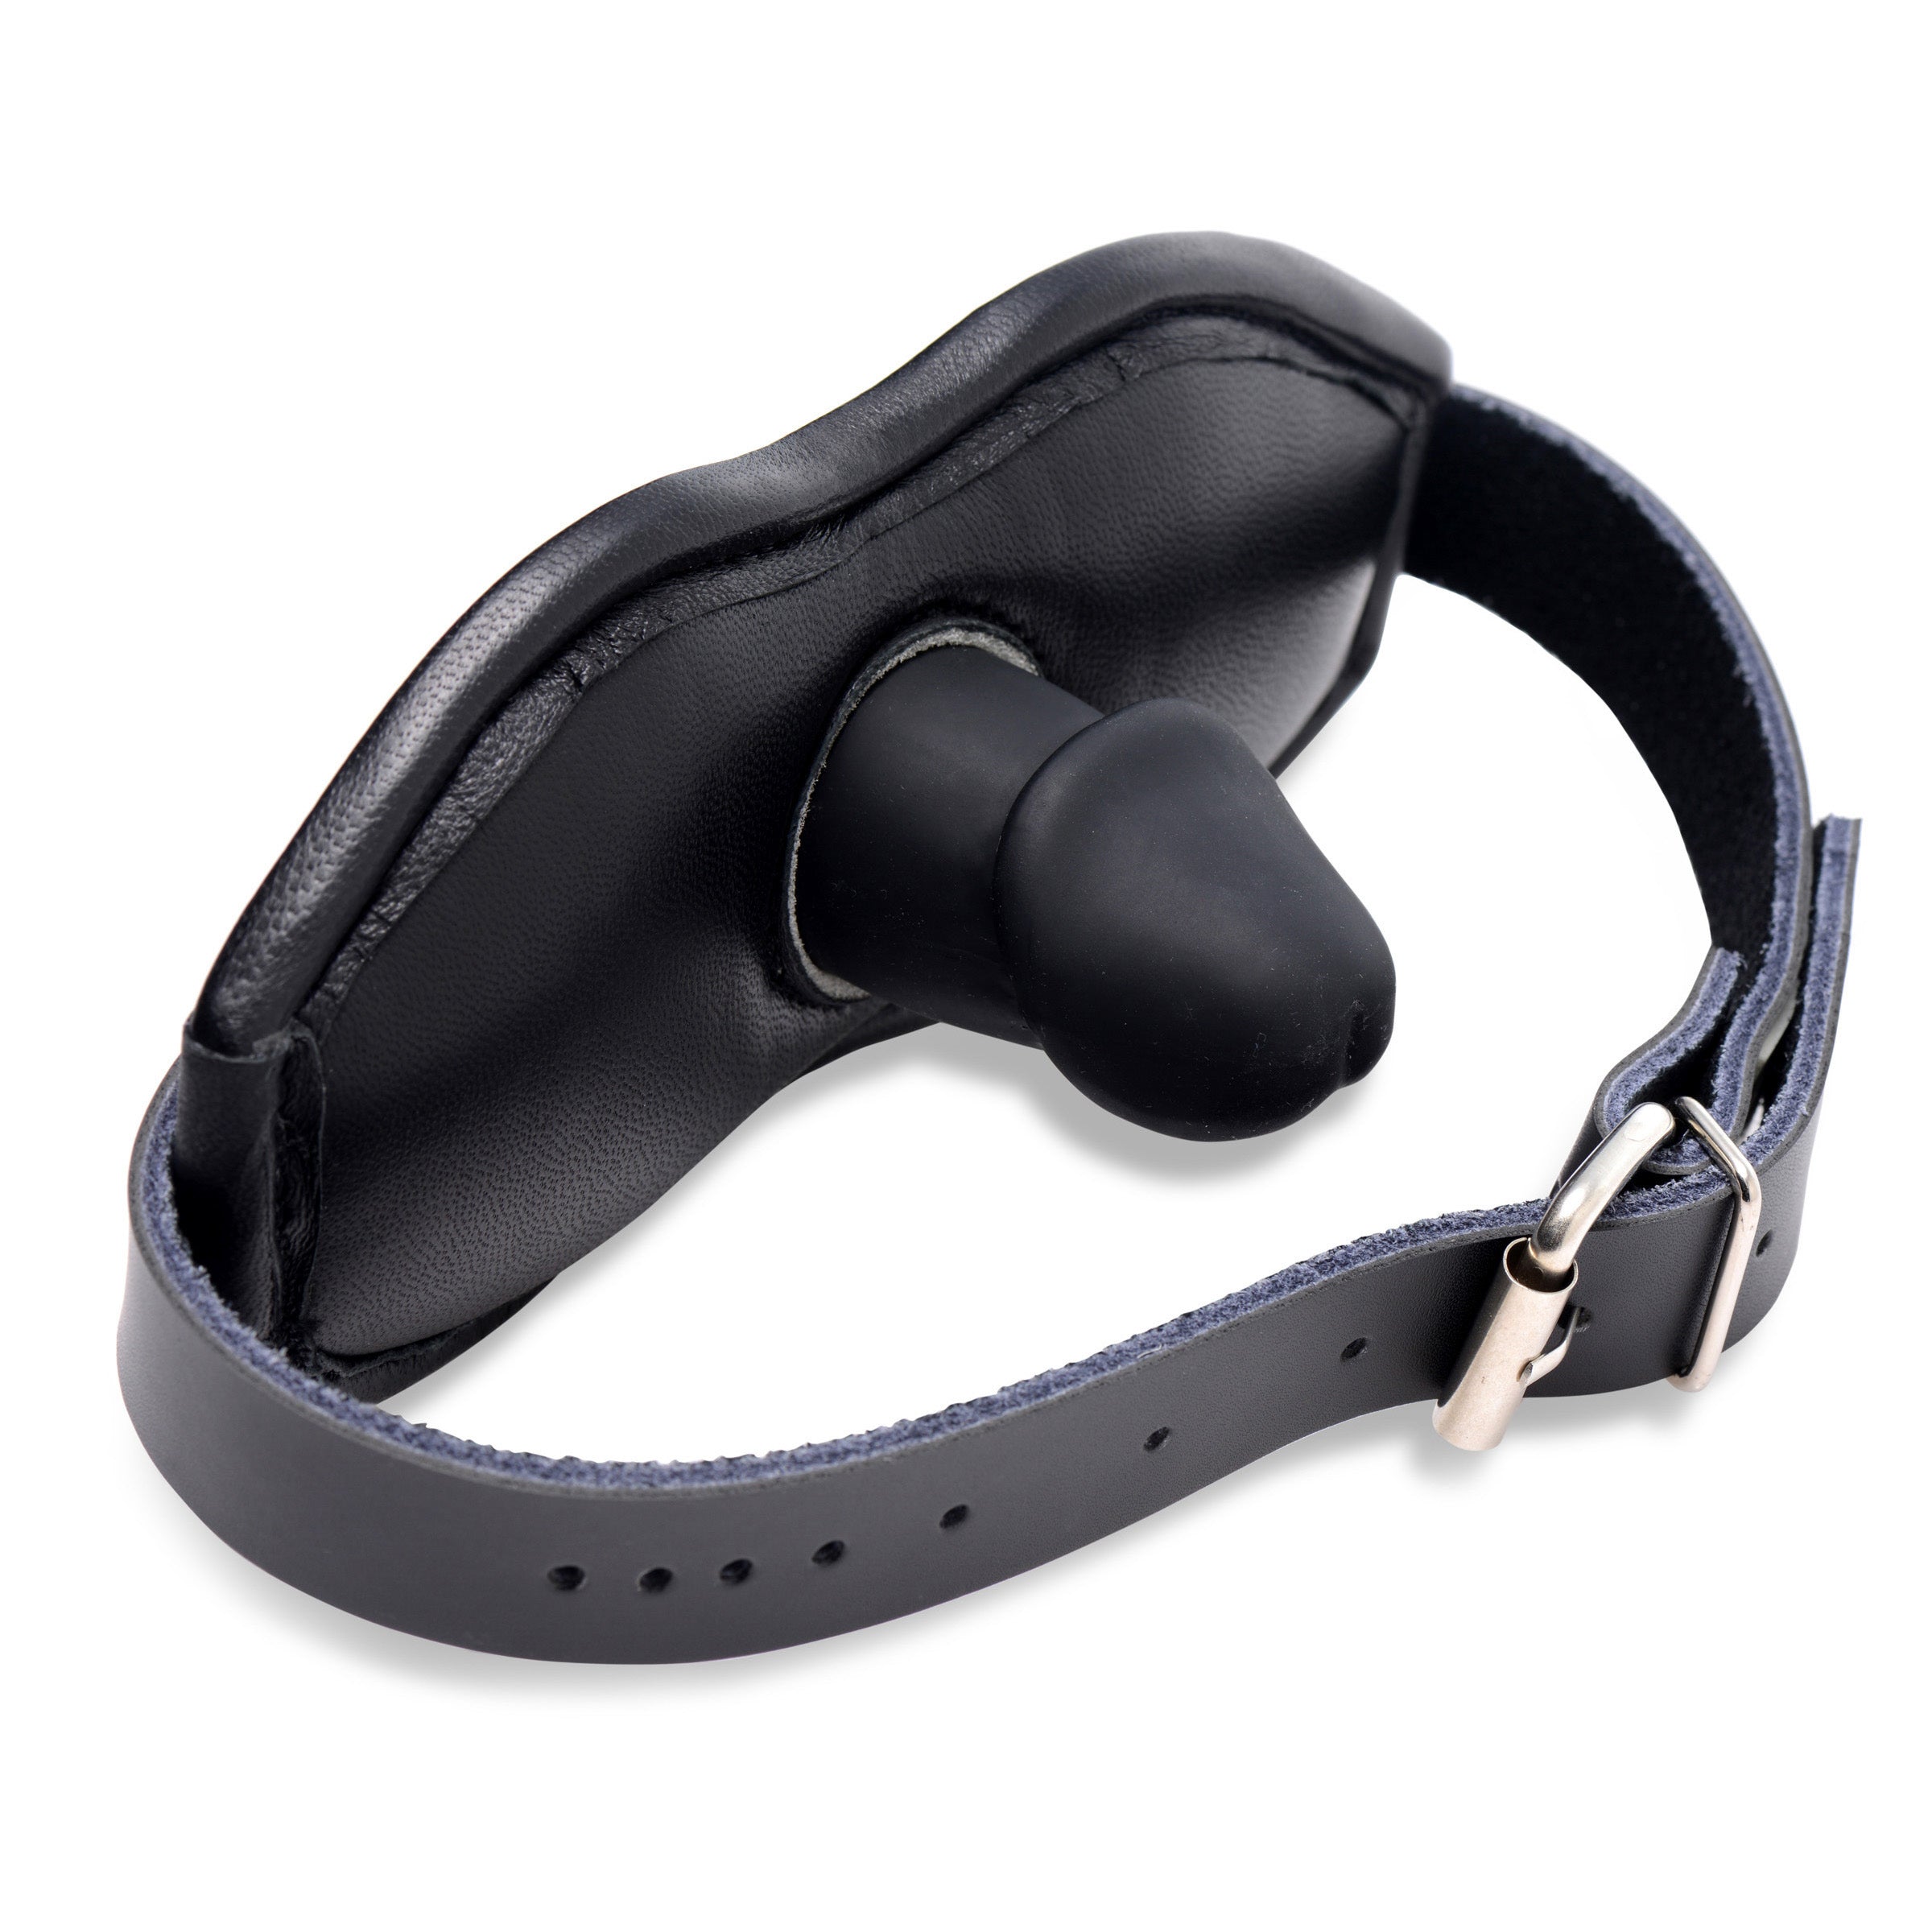 Leather Padded Silicone Penis Mouth Gag – Adult Sex Toys, Intimate Supplies, Sexual Wellness, Online Sex Store pic pic